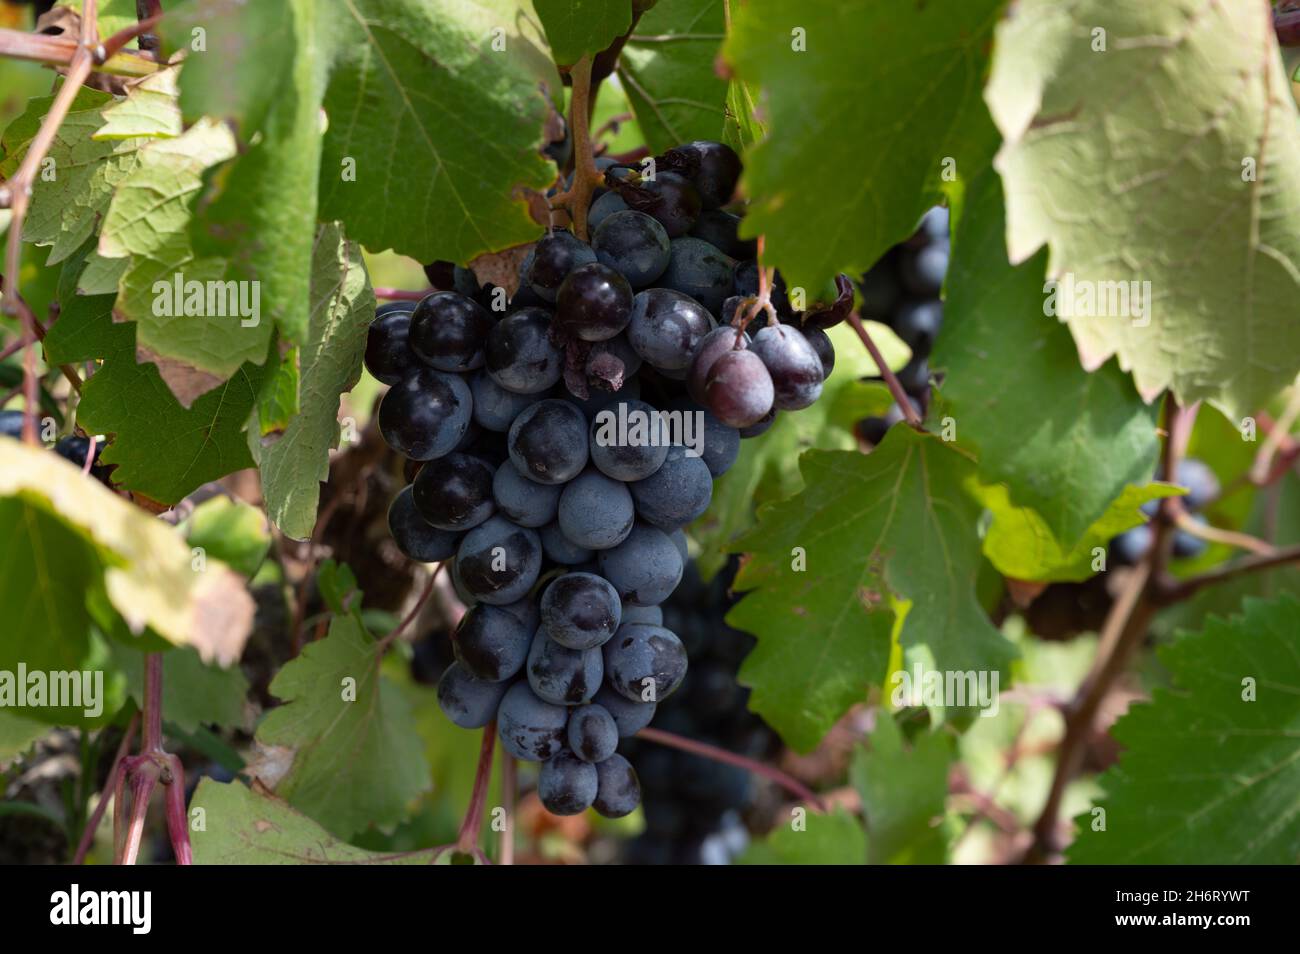 Wine industry on Cyprus island, bunches of ripe black grapes hanging on  Cypriot vineyards located on south slopes of Troodos mountain range, ready  to Stock Photo - Alamy